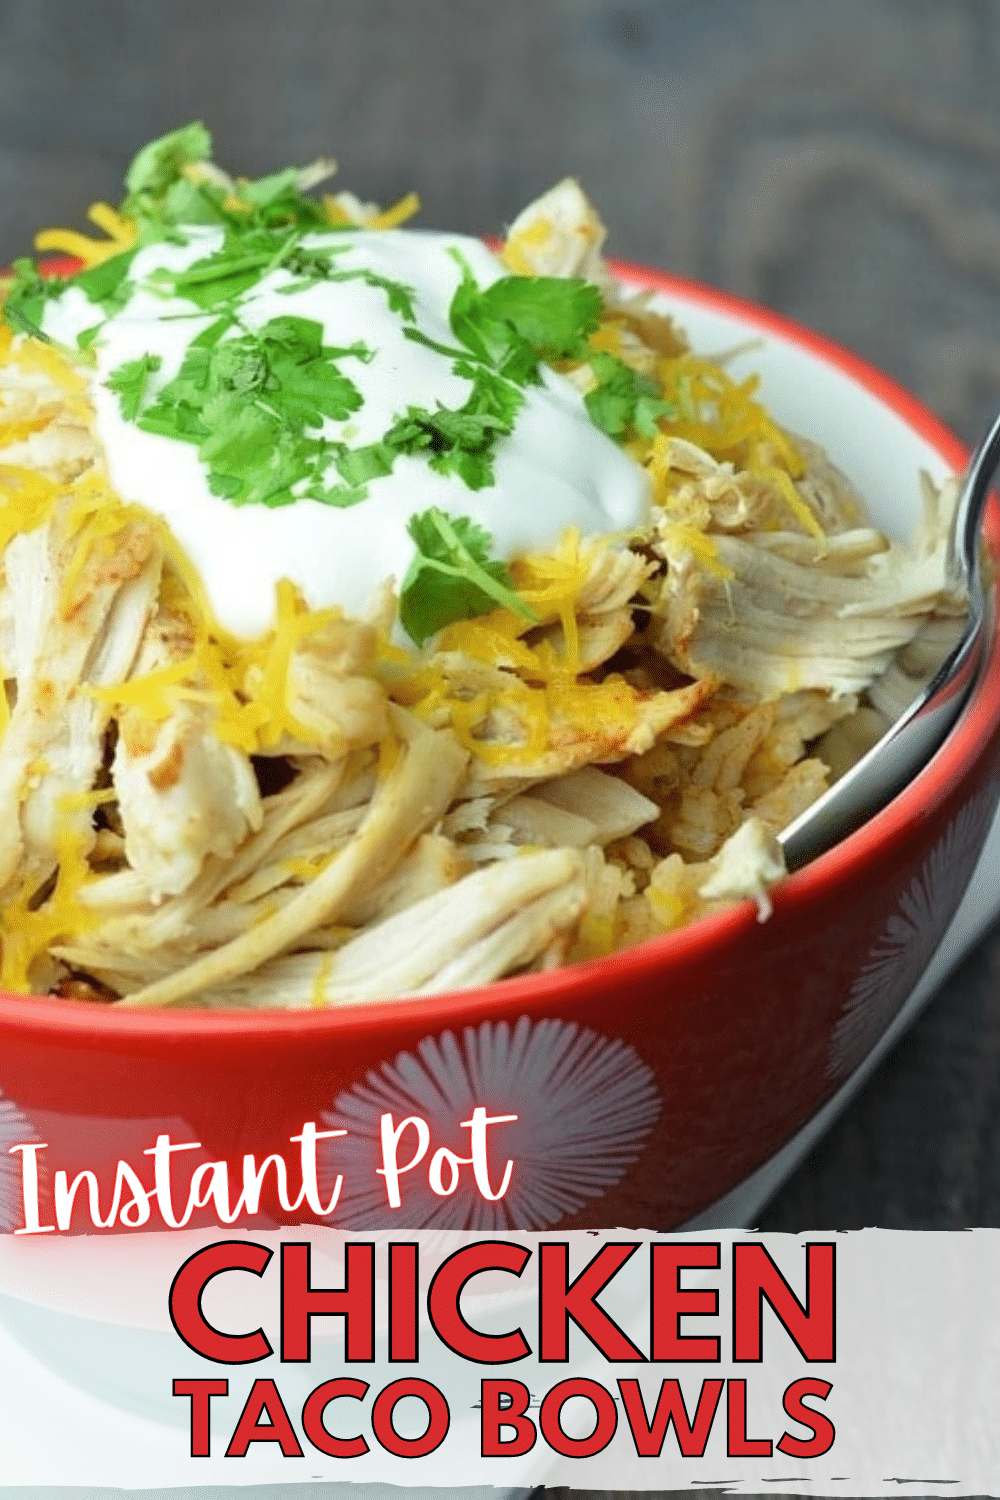 My family loves these Instant Pot Chicken Taco Bowls. Just a few minutes to prep and half an hour to cook. So easy and delicious! #instantpot #pressurecooker #chicken #easydinner via @wondermomwannab